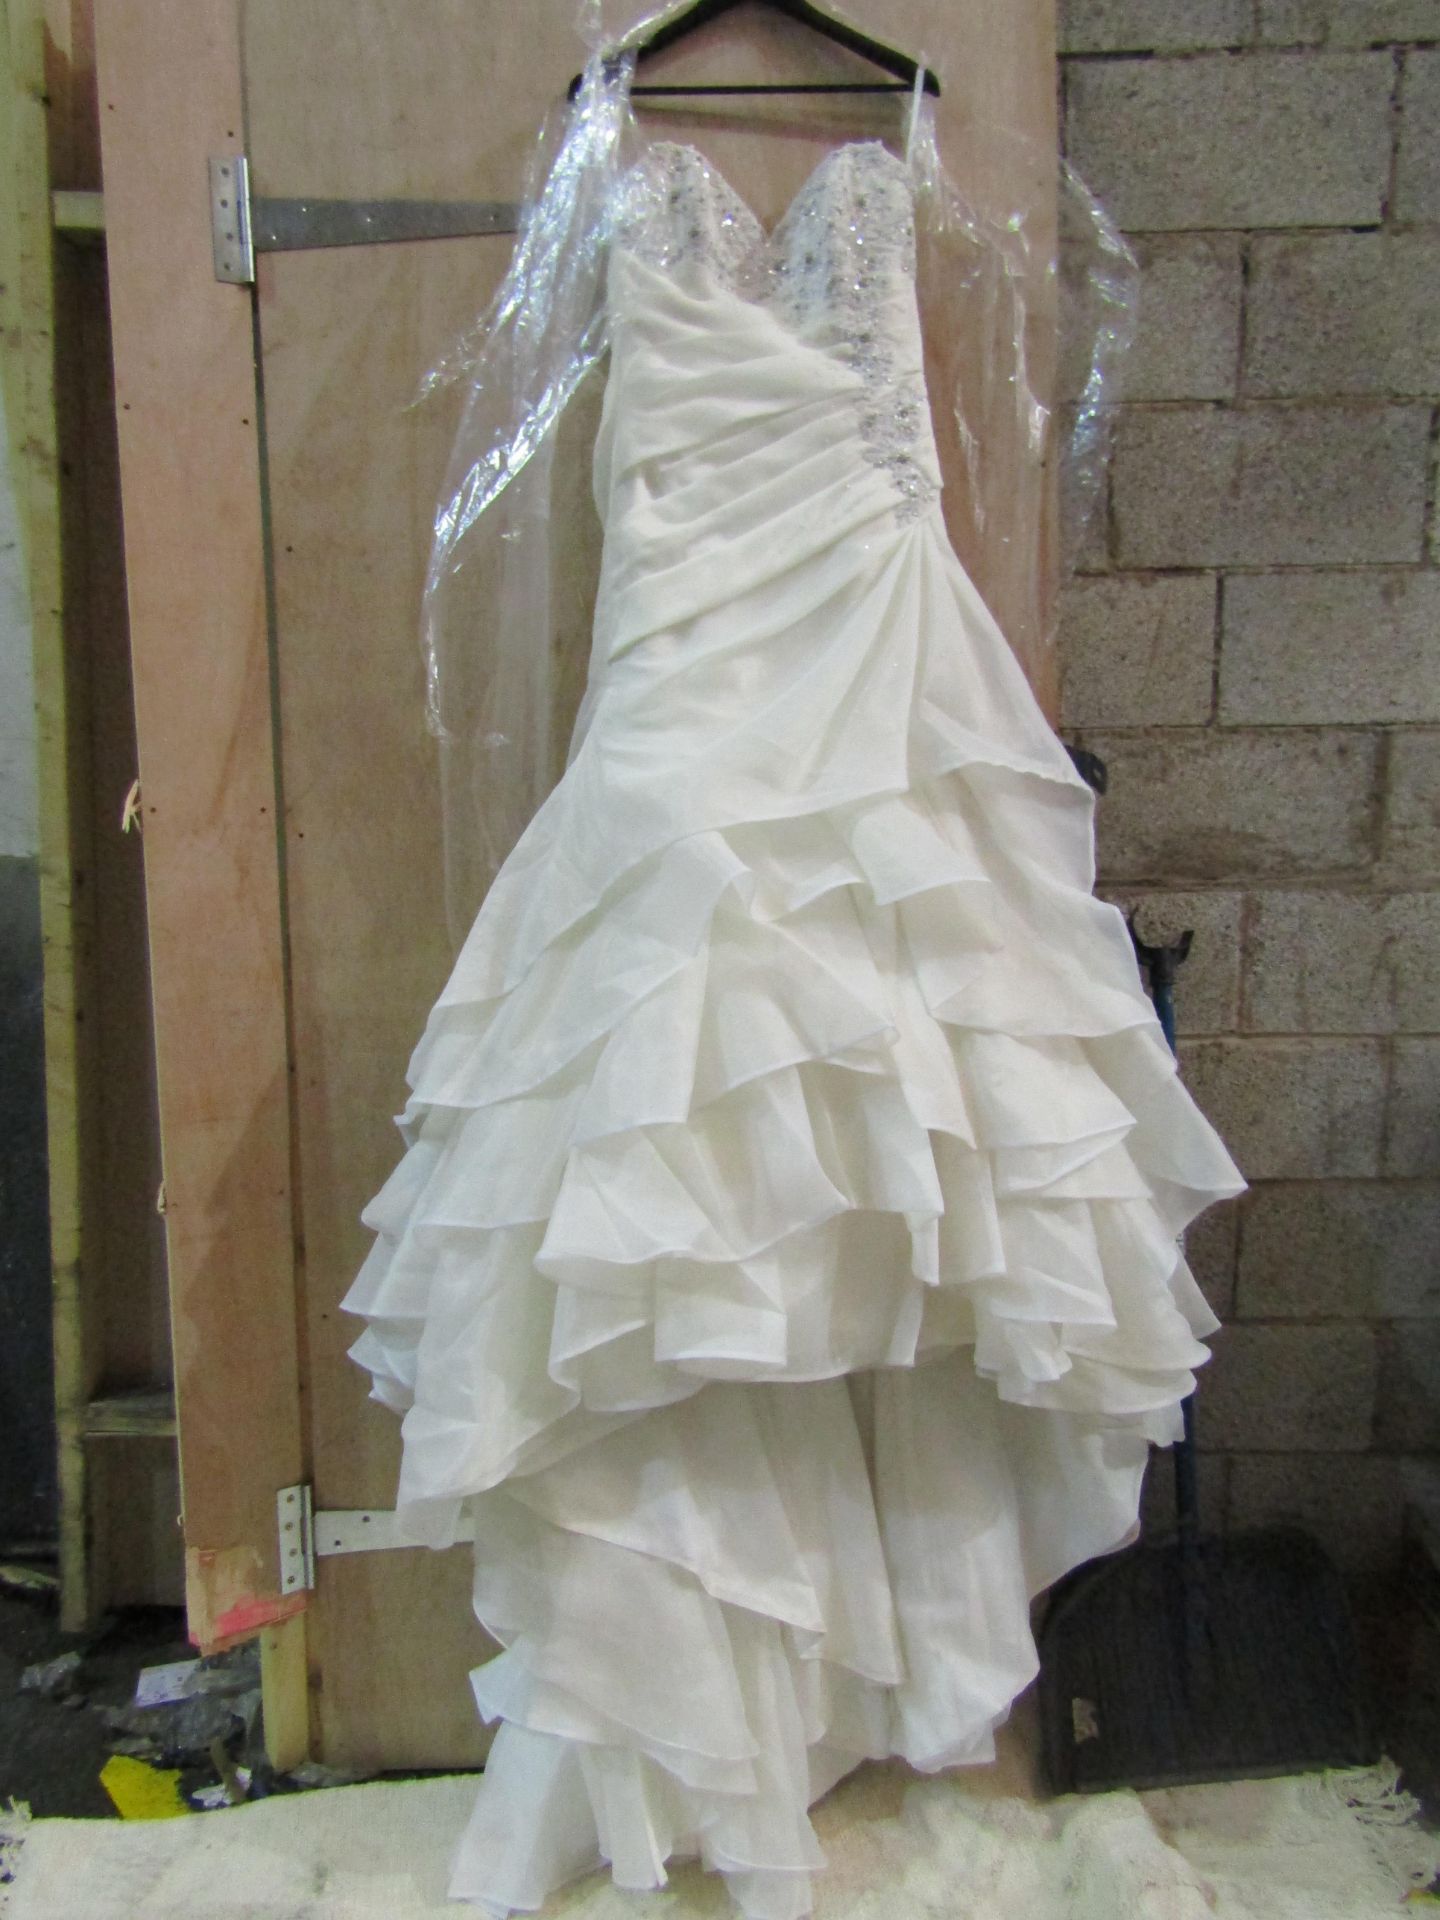 Approx 500 pieces of wedding shop stock to include wedding dresses, mother of the bride, dresses, - Image 2 of 108